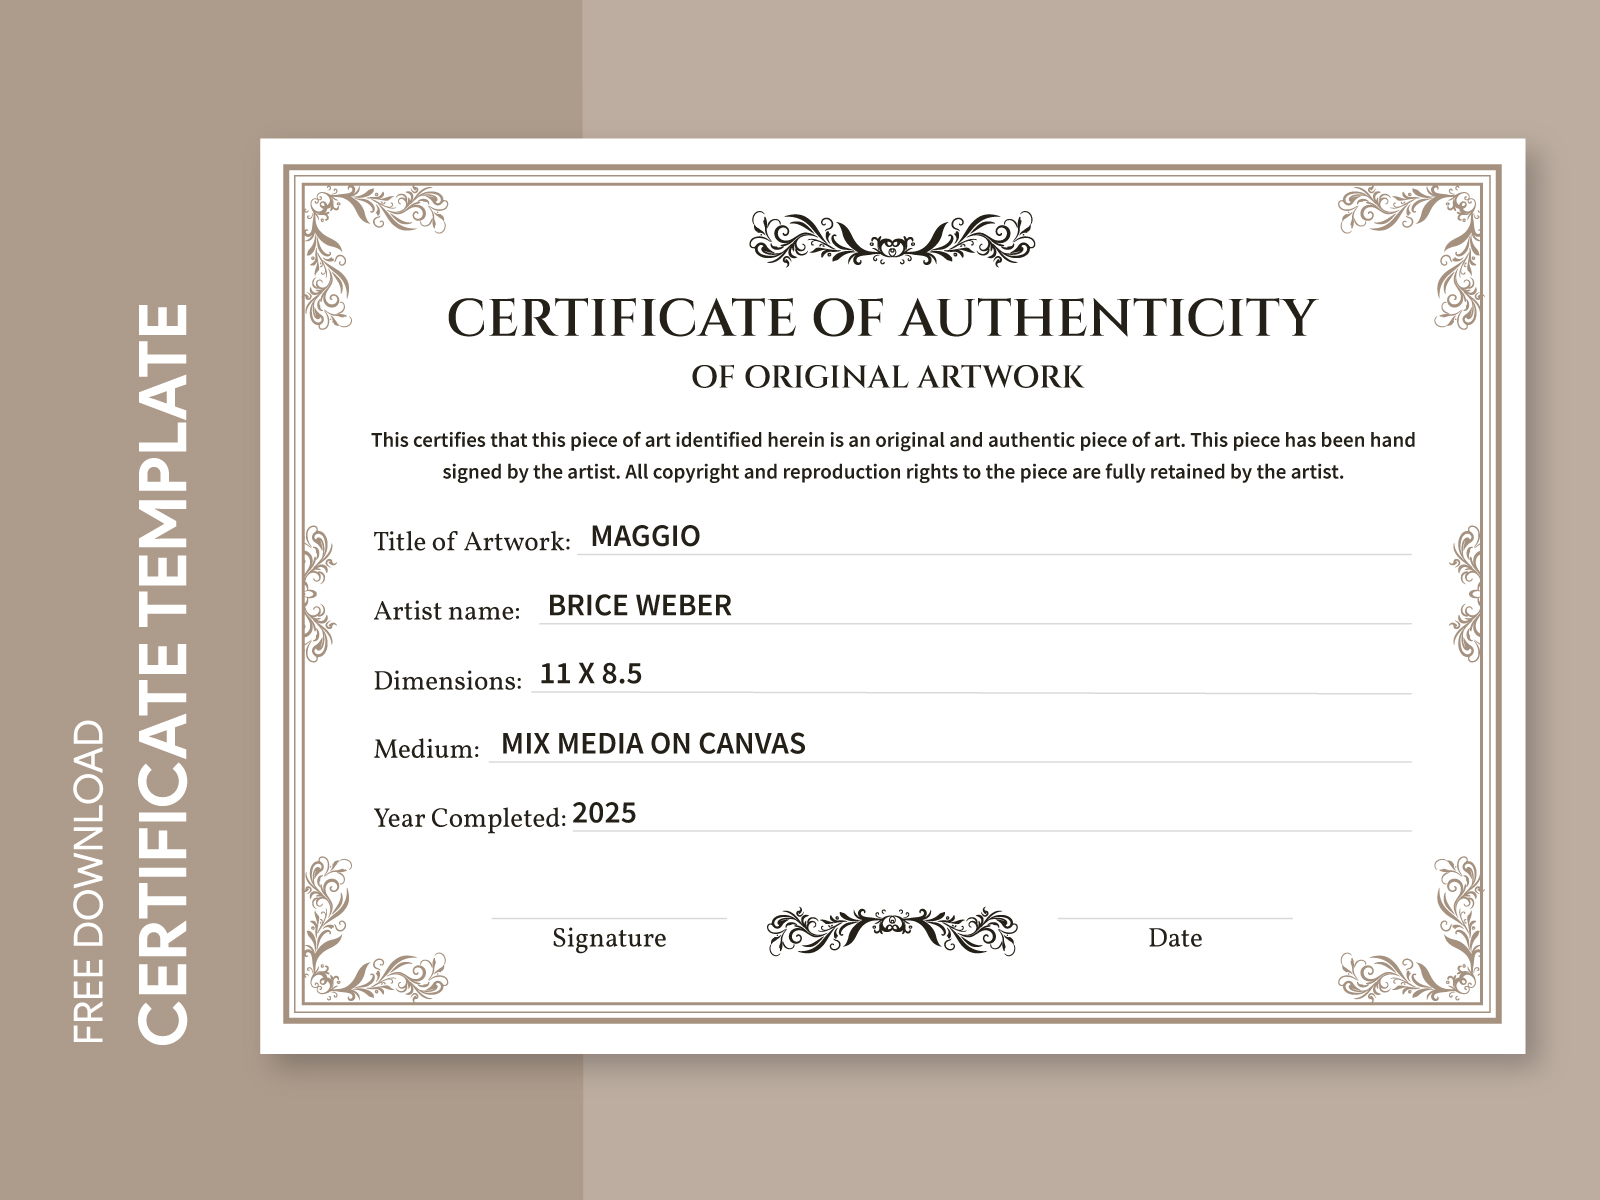 antiquities certificate of authenticity template with photo